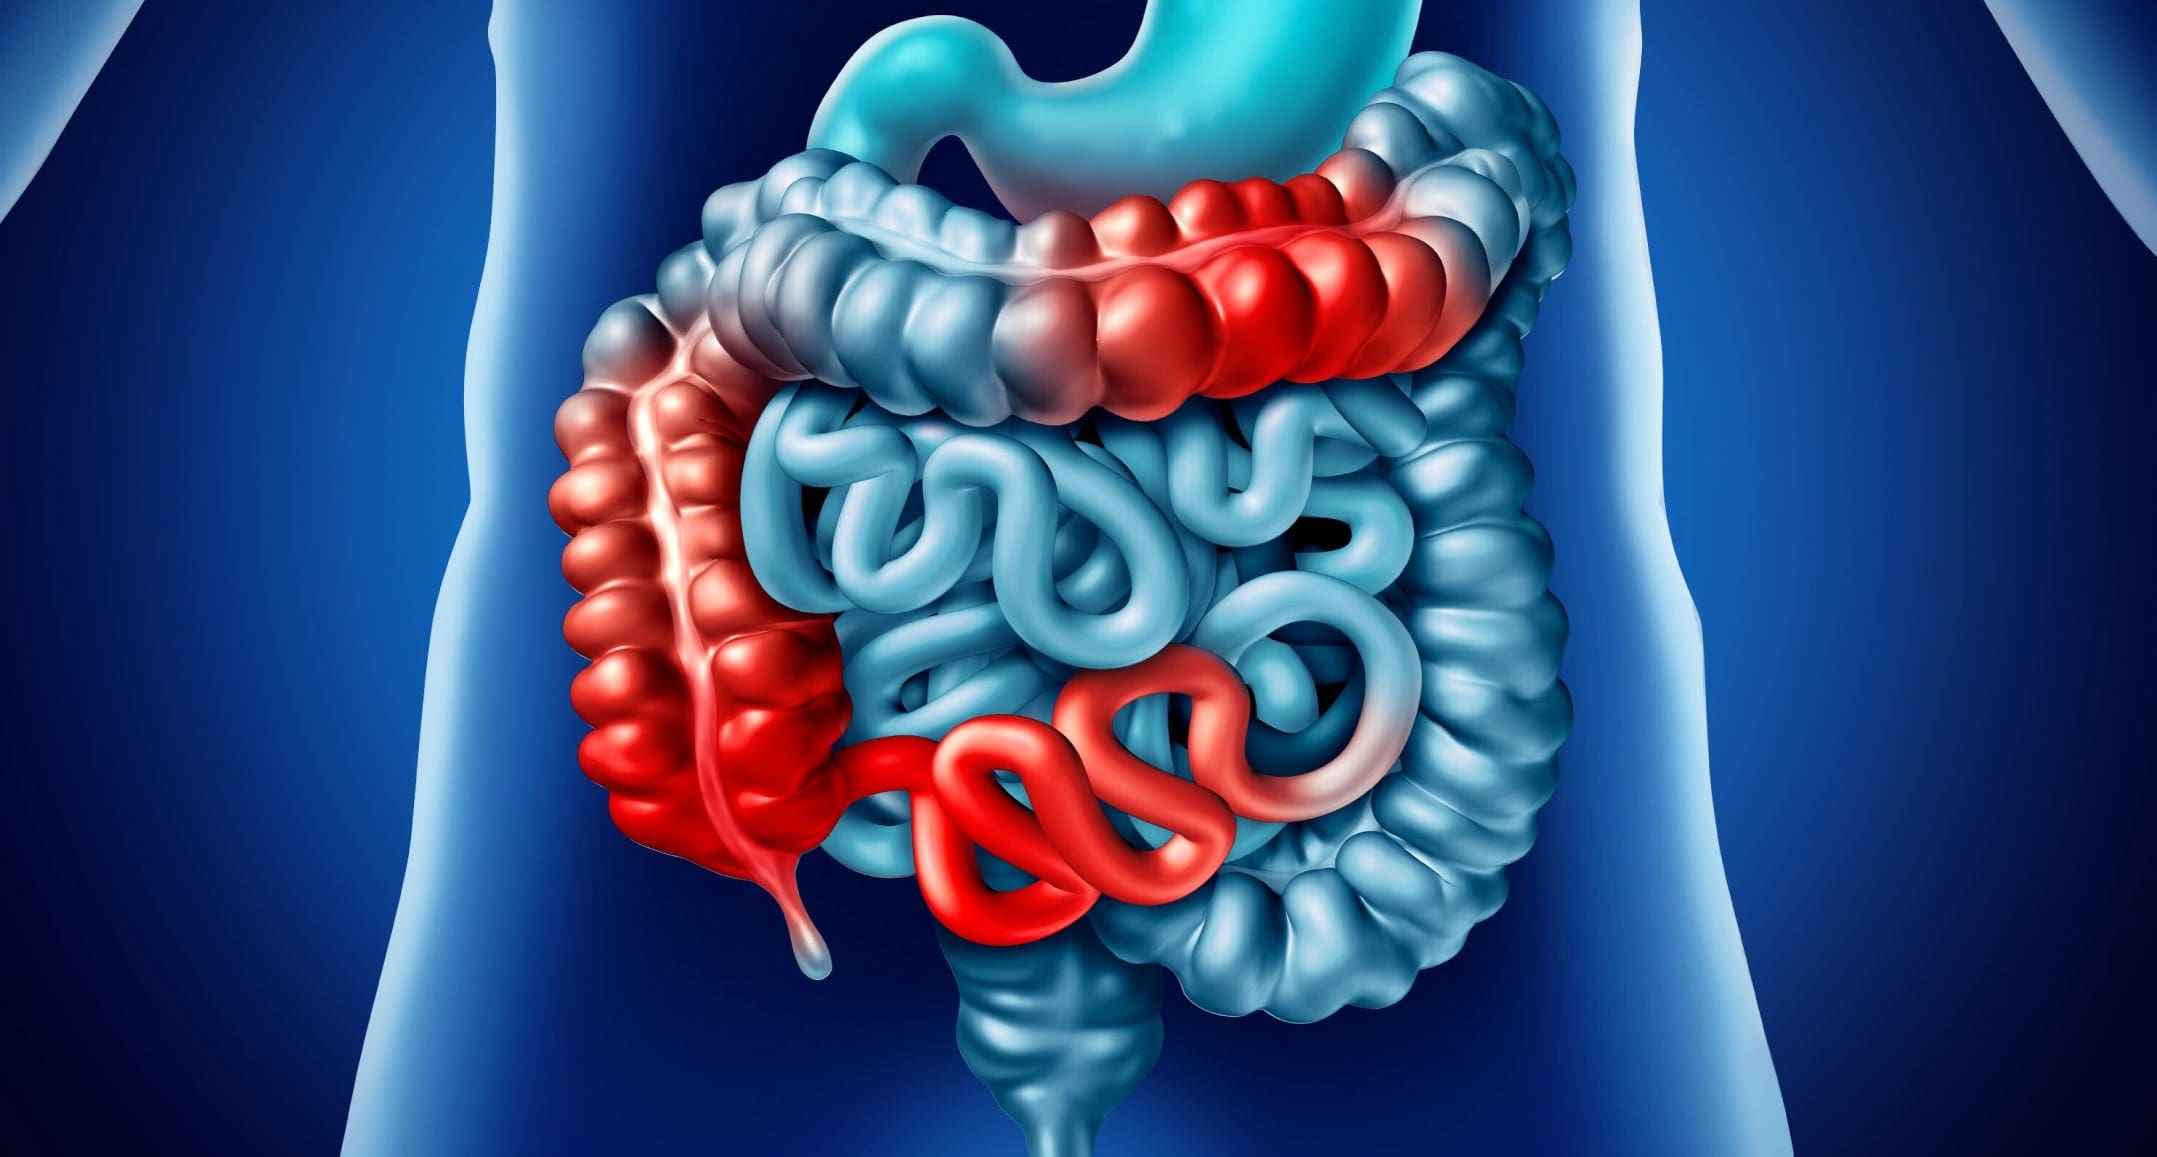 Image of inflammation in the GI tract associated with Crohn's disease.